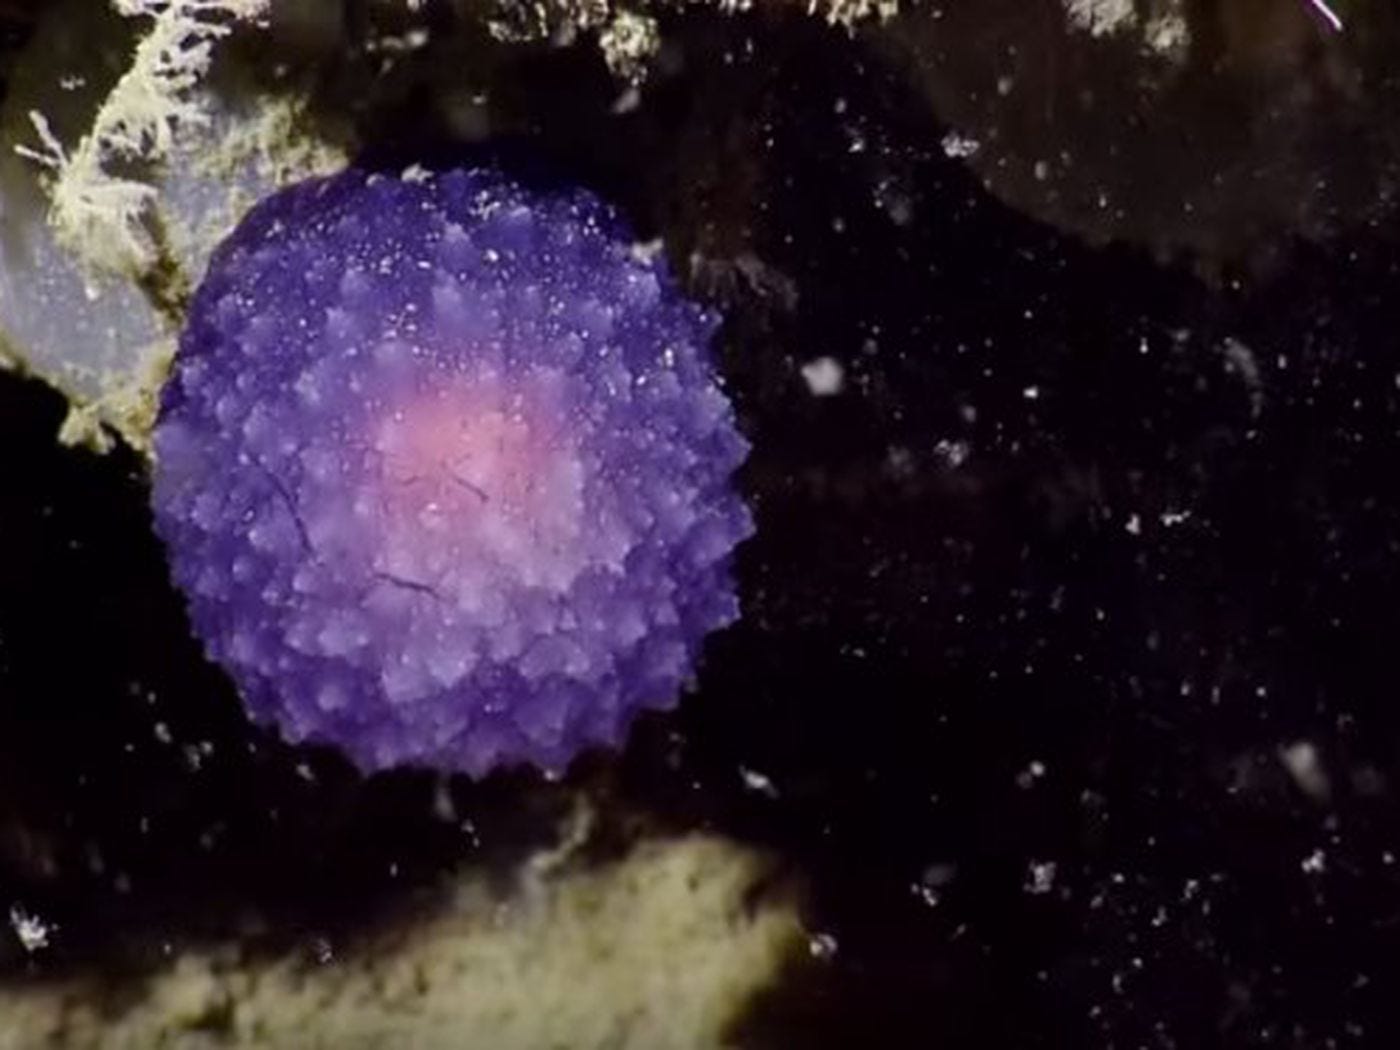 Scientists discovered a glowing purple orb at the bottom of the ocean. They  still have no idea what it is. - Vox